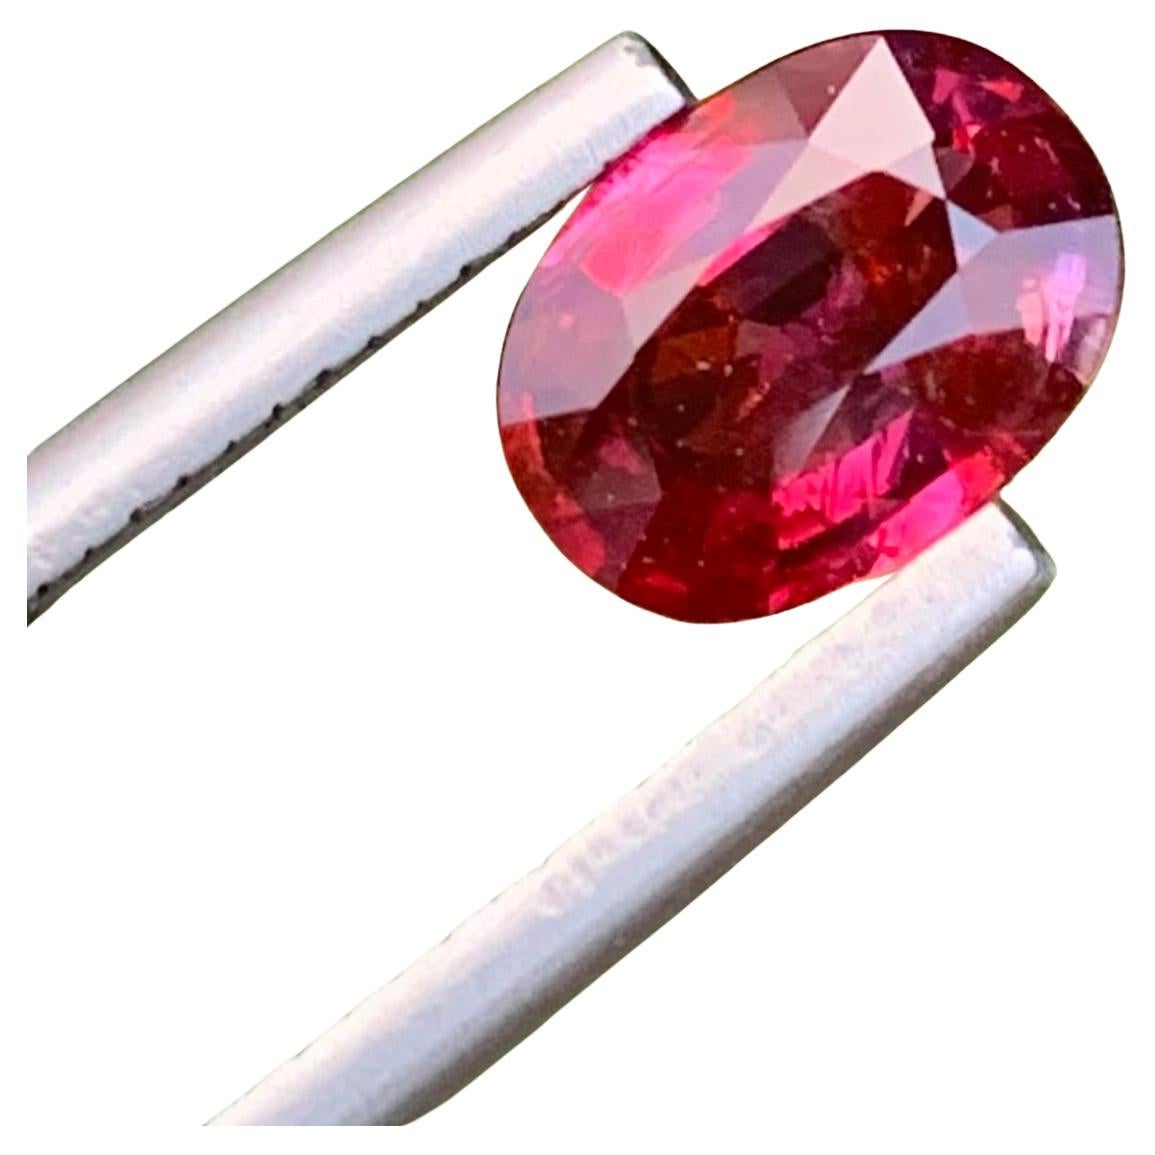 Certified Natural Loose 1.79 Carat Lustrous Ruby Oval Shape Gem From Africa 